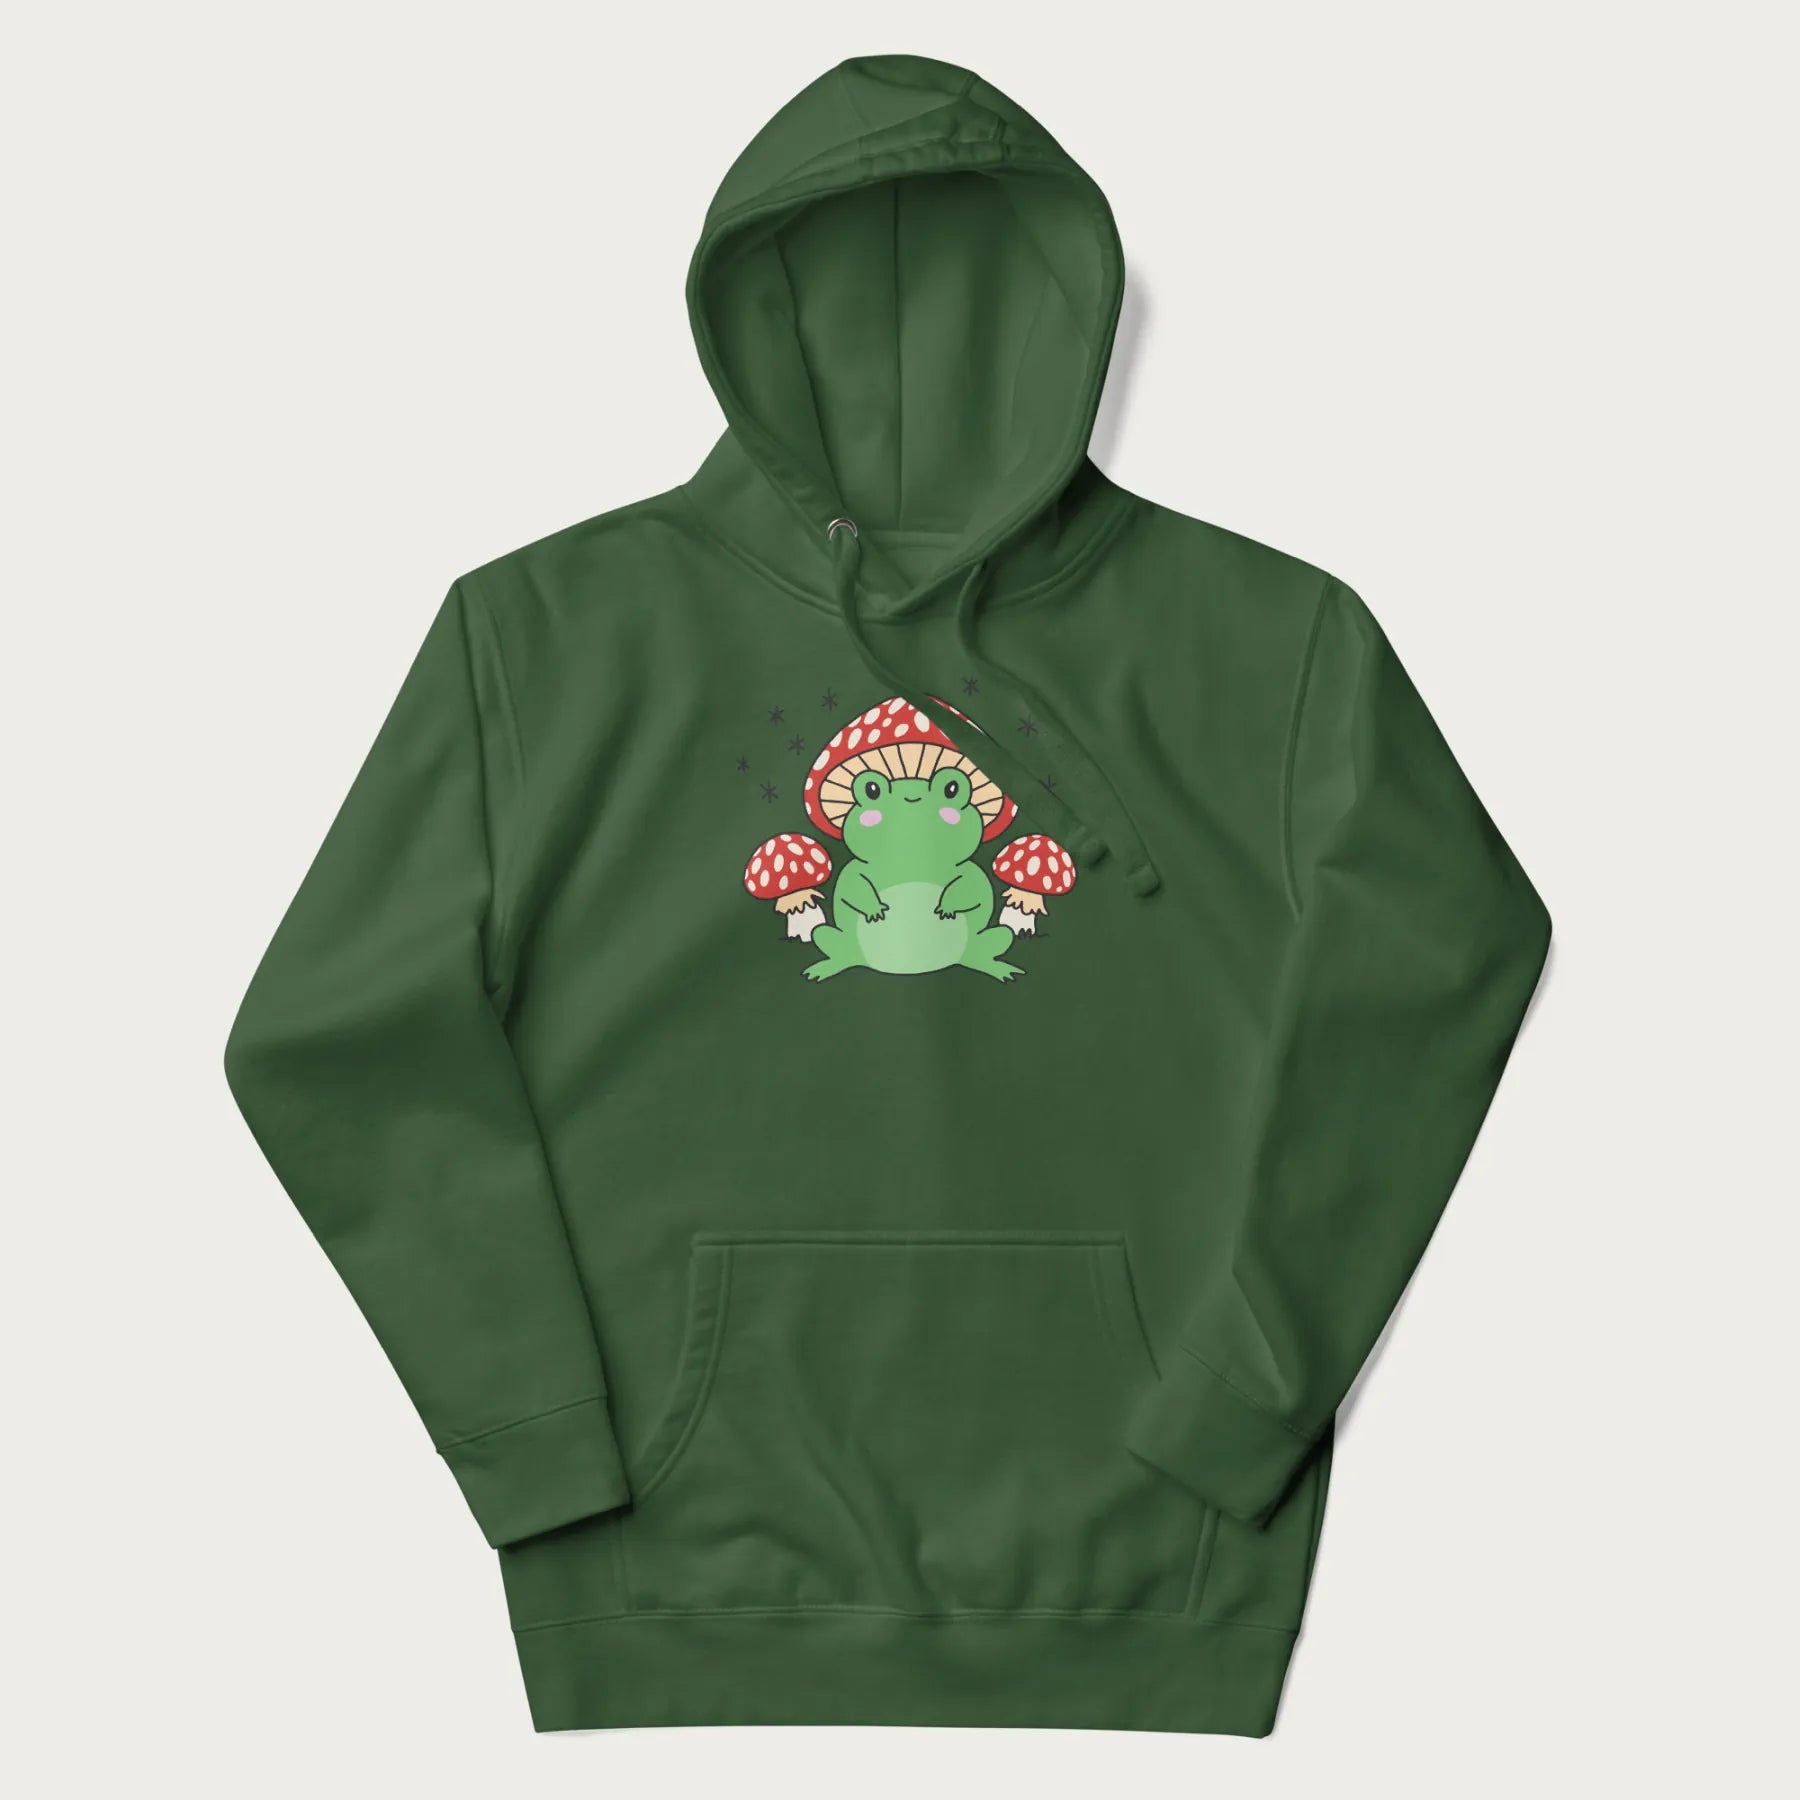 Forest green hoodie will illustration of a cute green frog with red and white mushrooms.